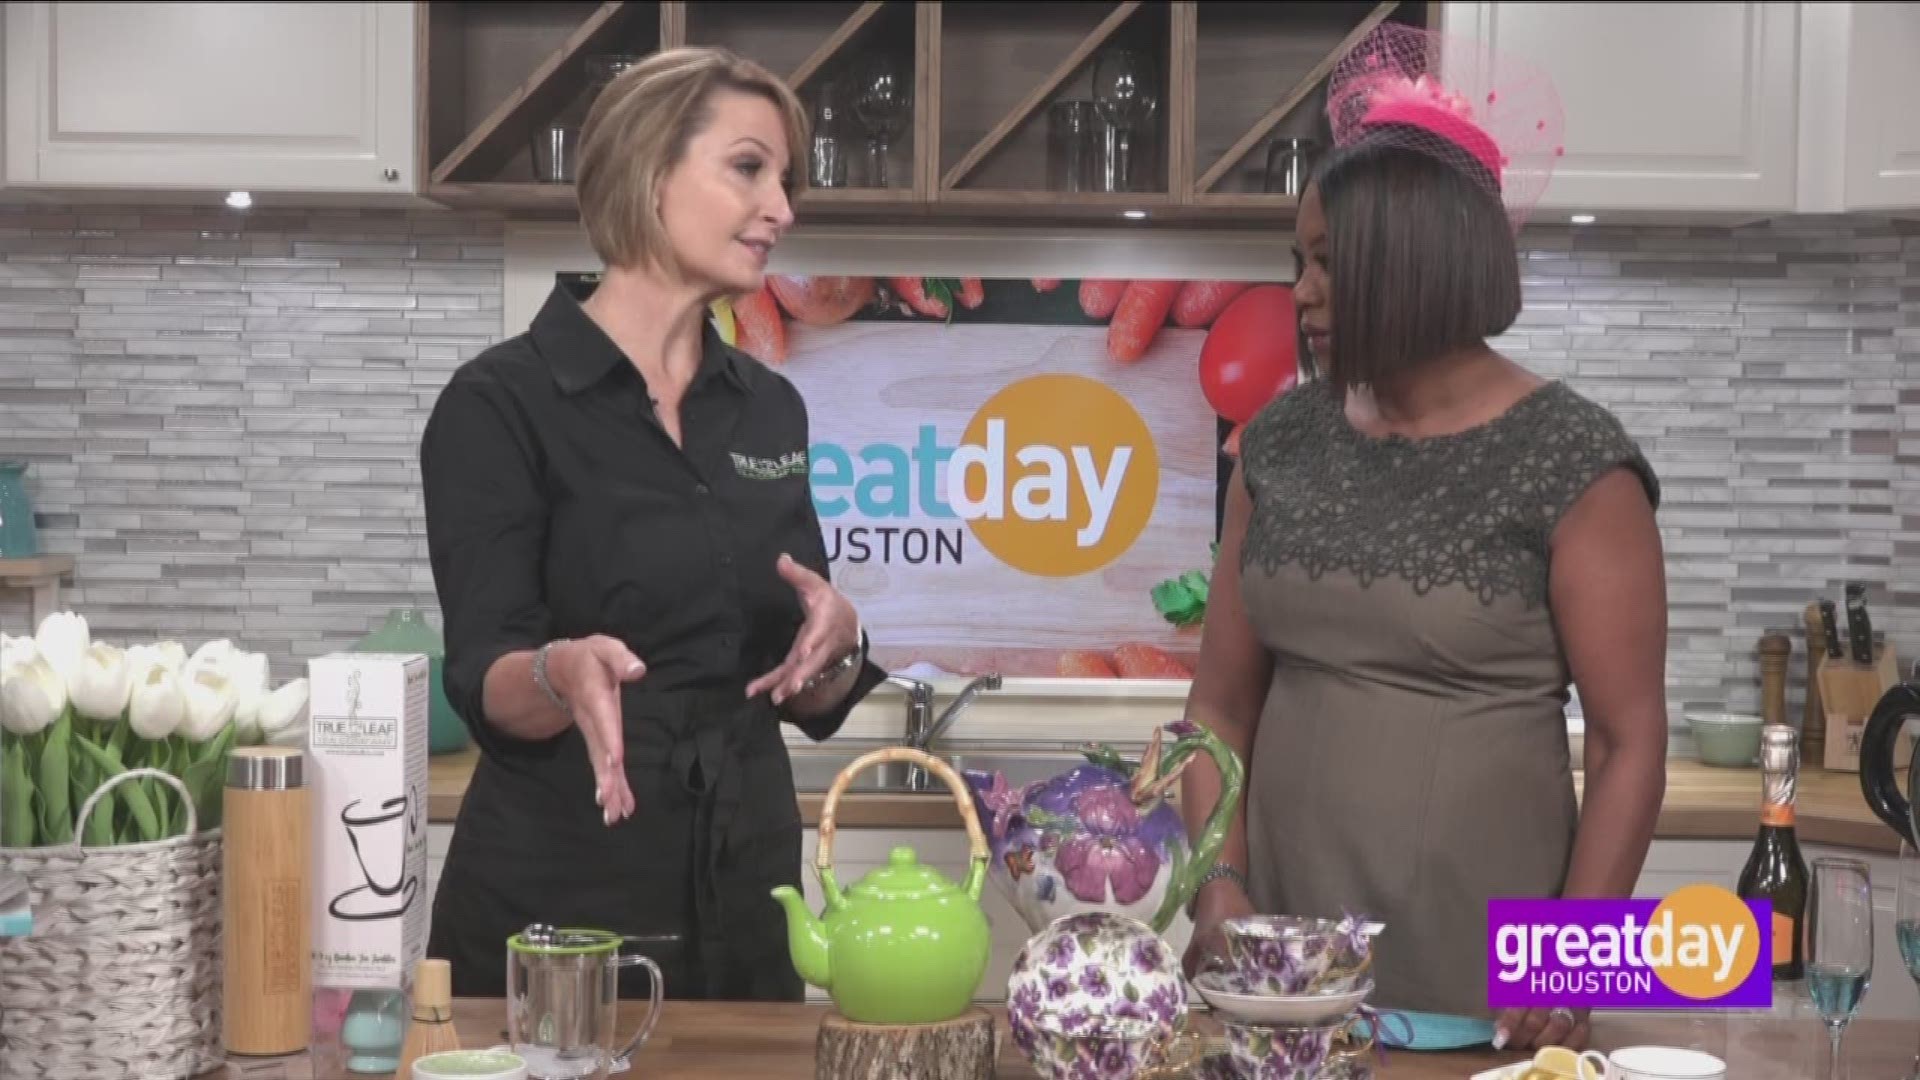 Kim McHugh, Owner of McHugh's Tea Room, stopped by Great Day Houston to discuss the health benefits of tea.